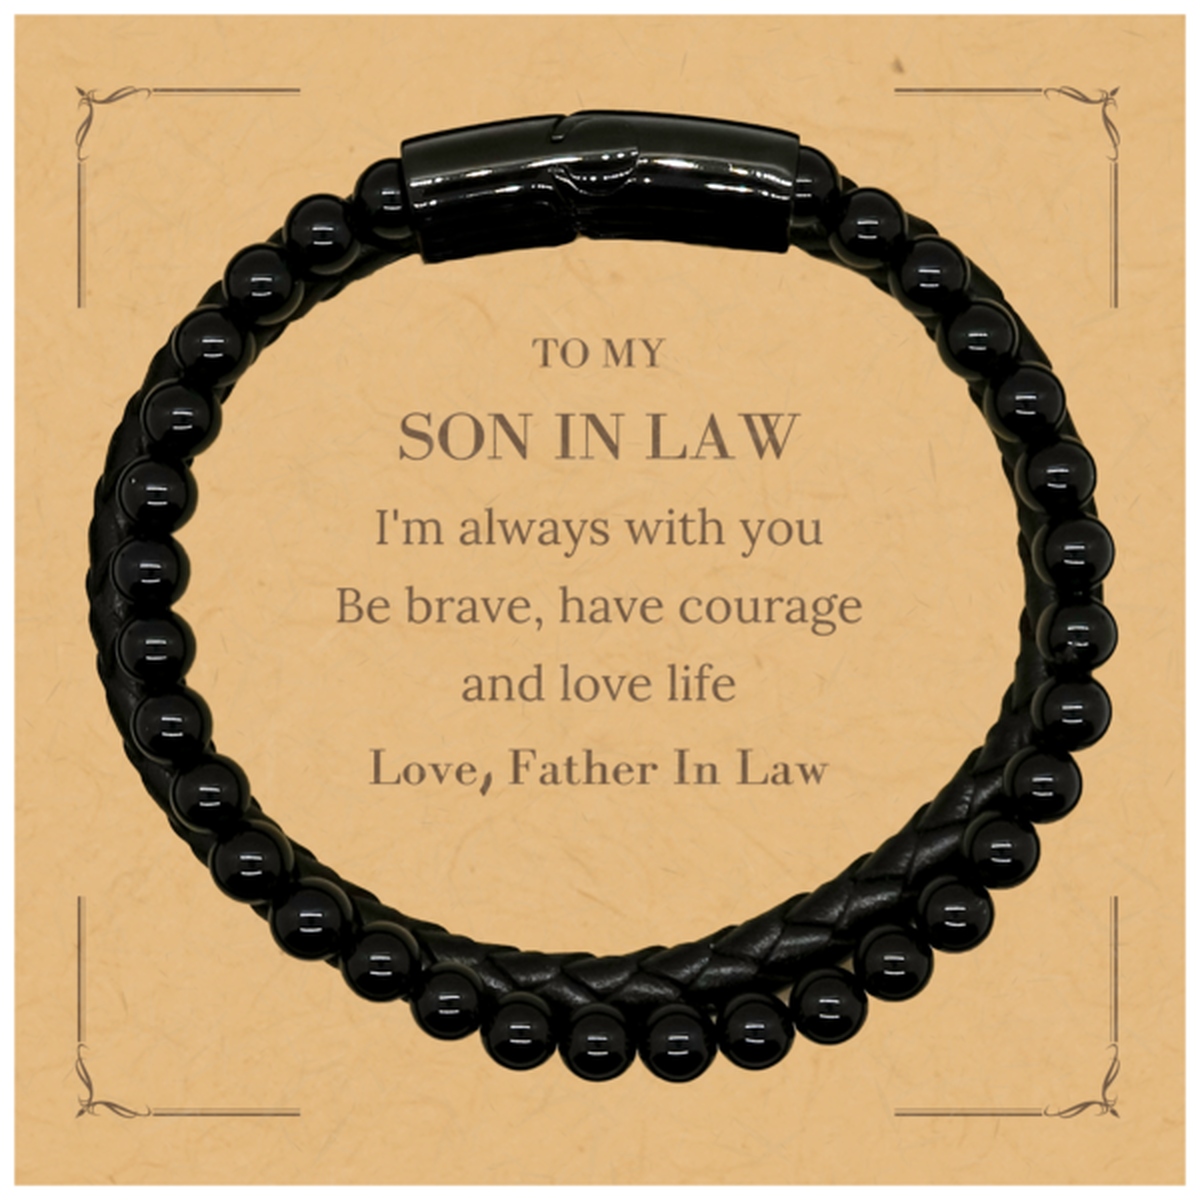 To My Son In Law Gifts from Father In Law, Unique Stone Leather Bracelets Inspirational Christmas Birthday Graduation Gifts for Son In Law I'm always with you. Be brave, have courage and love life. Love, Father In Law